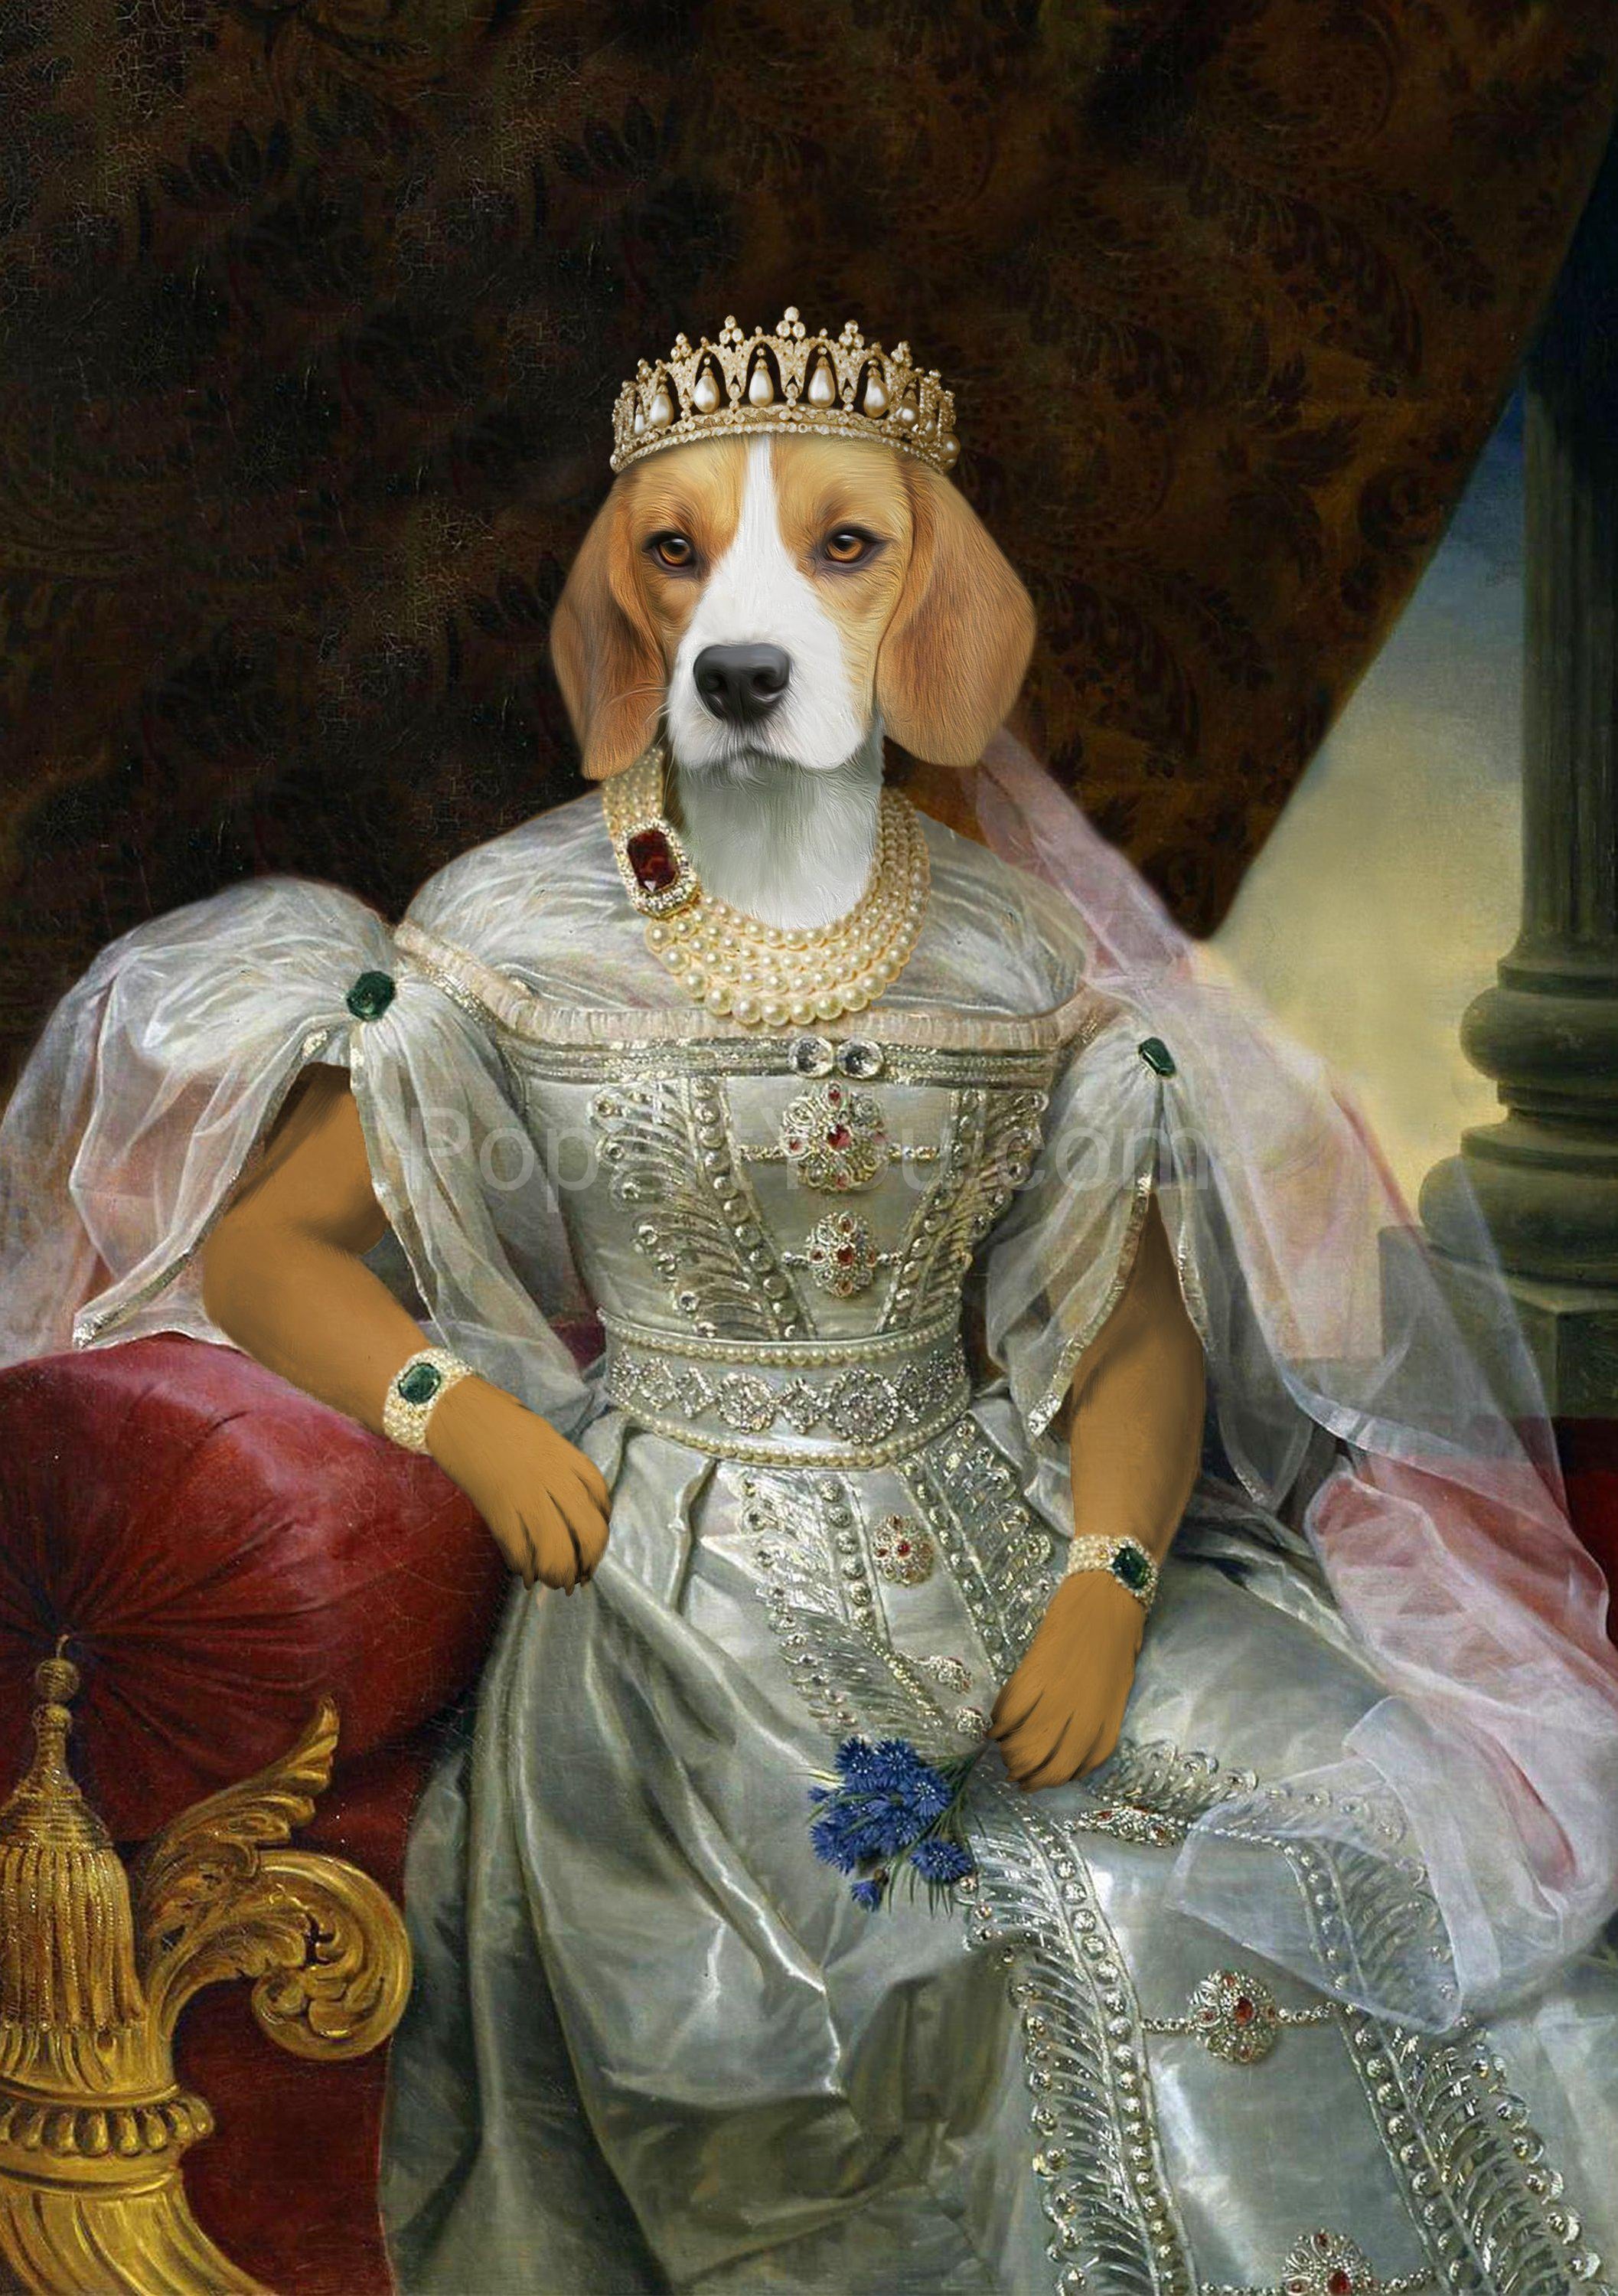 The portrait shows a female dog with a human body, dressed in a silver royal dress with a crown and a wristwatch